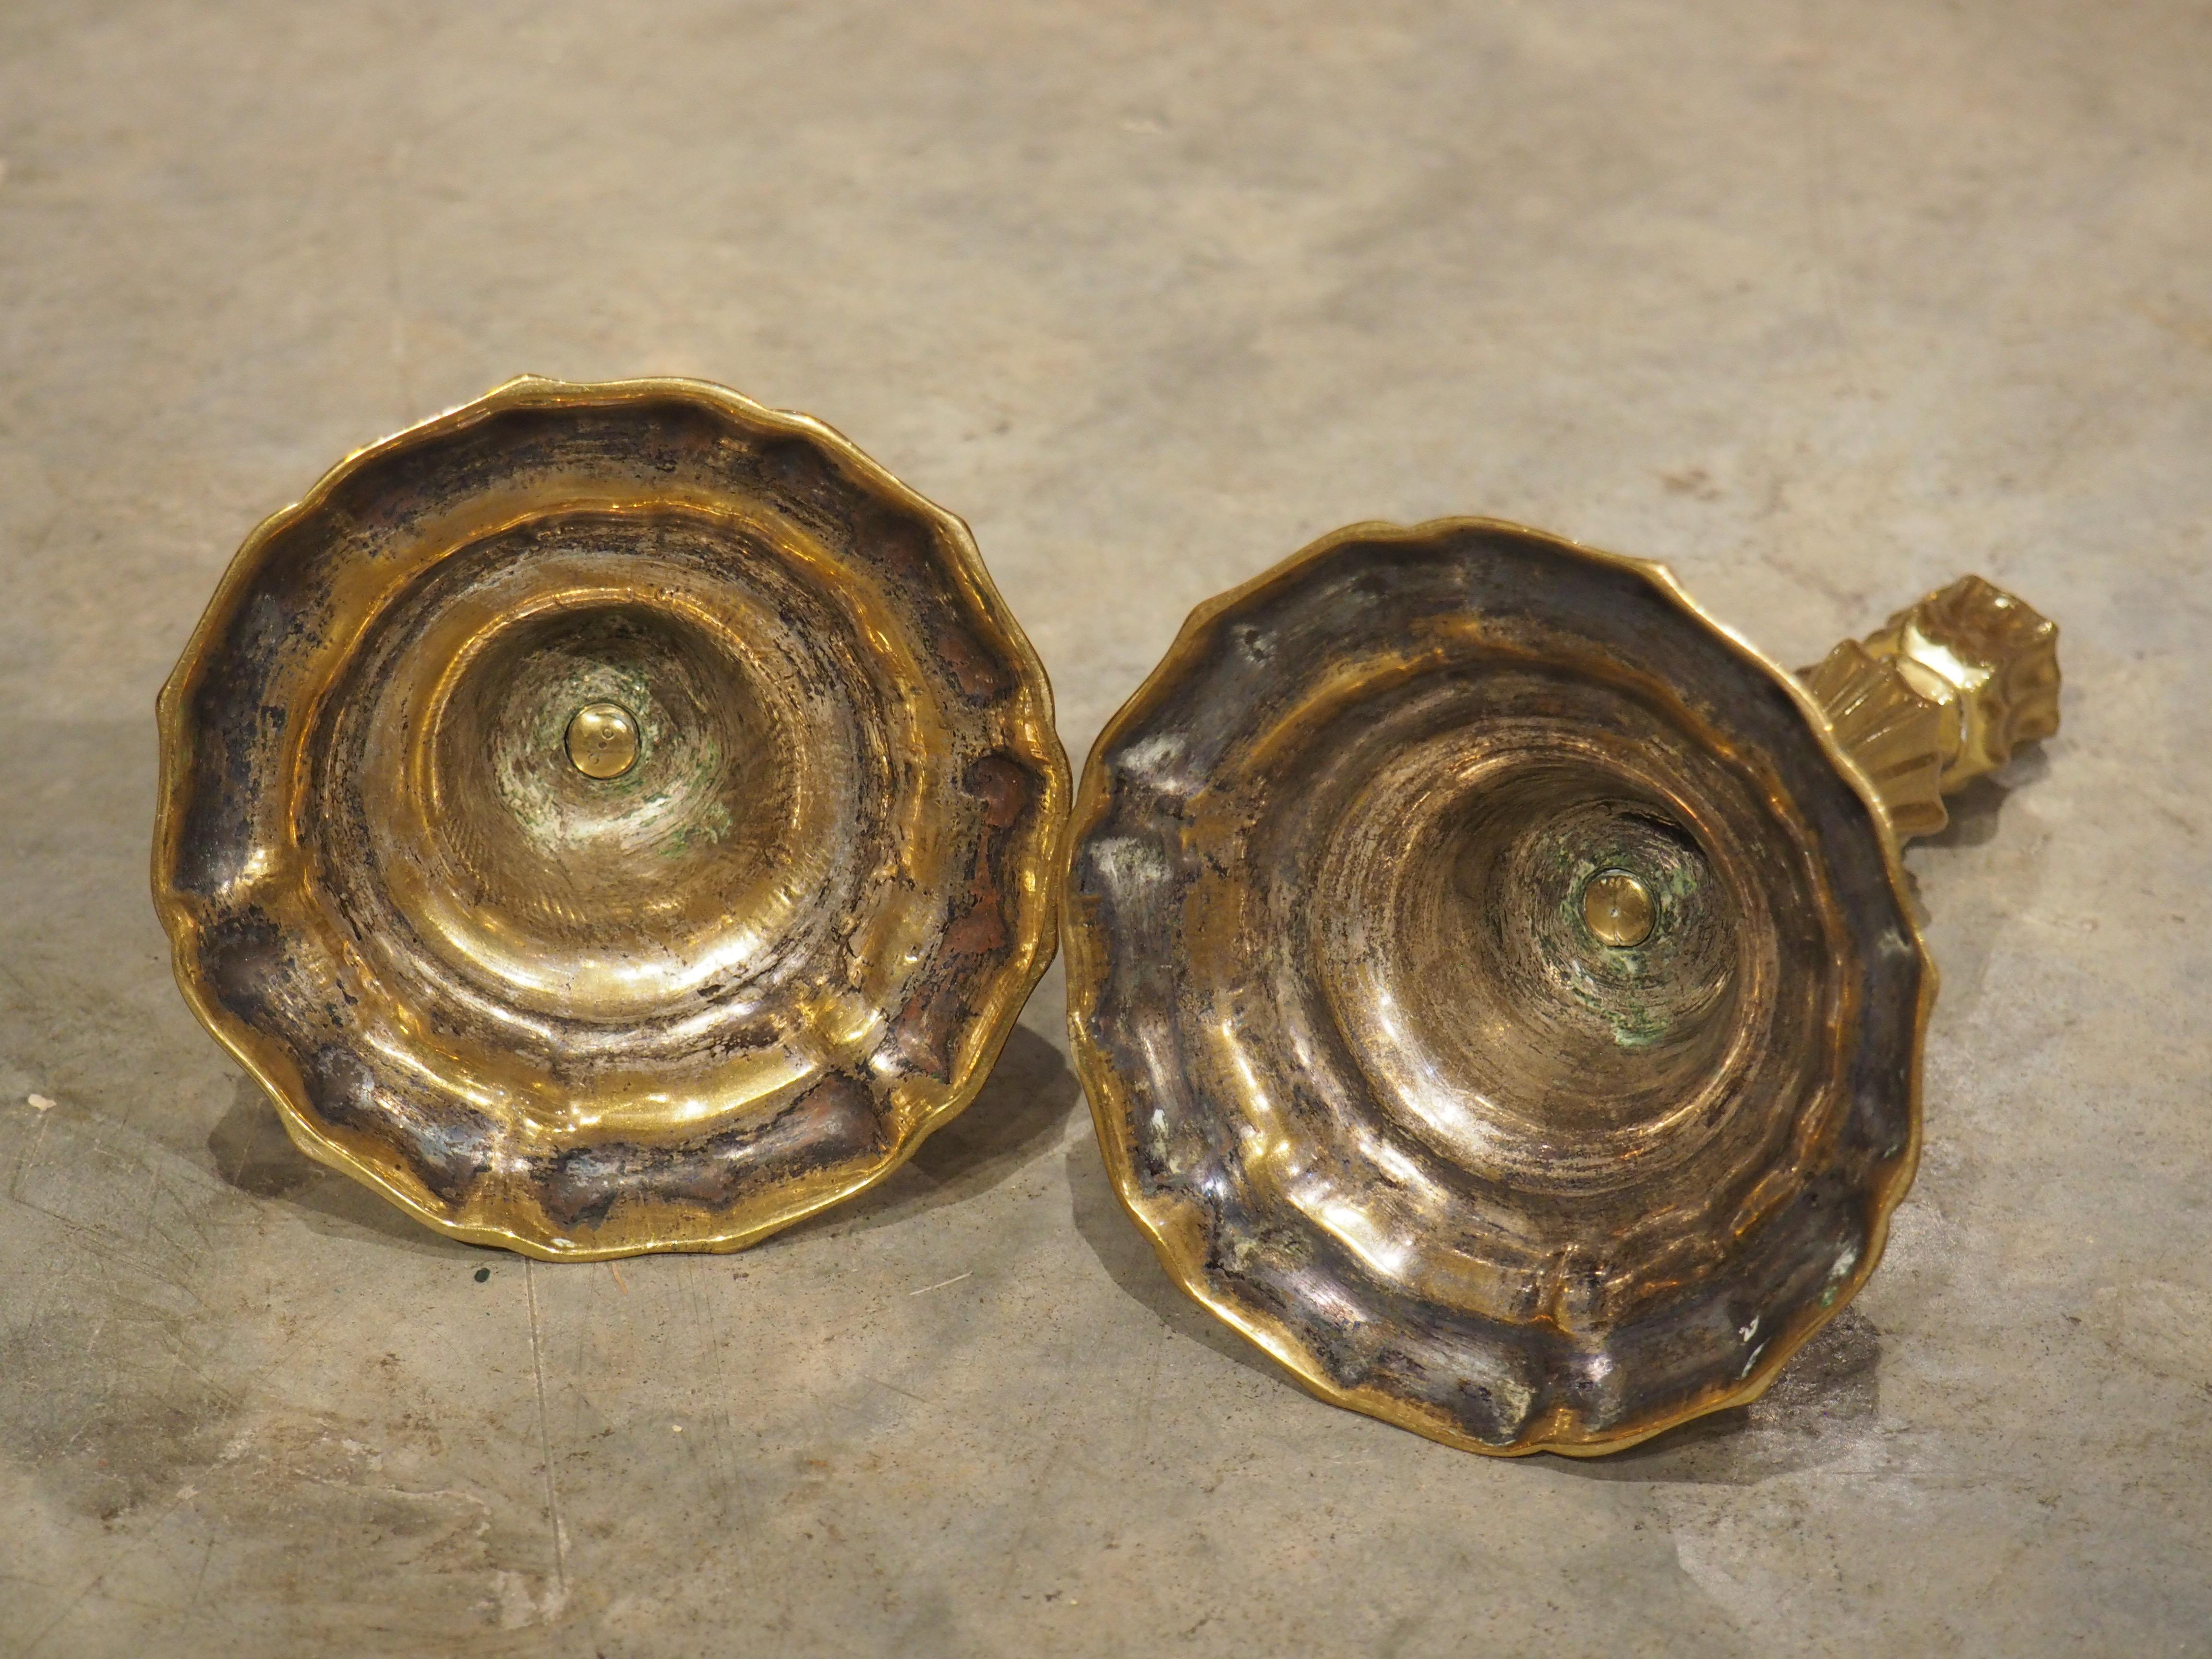 Cast in France during the 1700s, this pair of gilt bronze candlesticks feature highly contoured and curved bases are mirrored by the recessed lobes that embellish the shafts and capitals that are reminiscent of closed flower buds. Our 18th-century